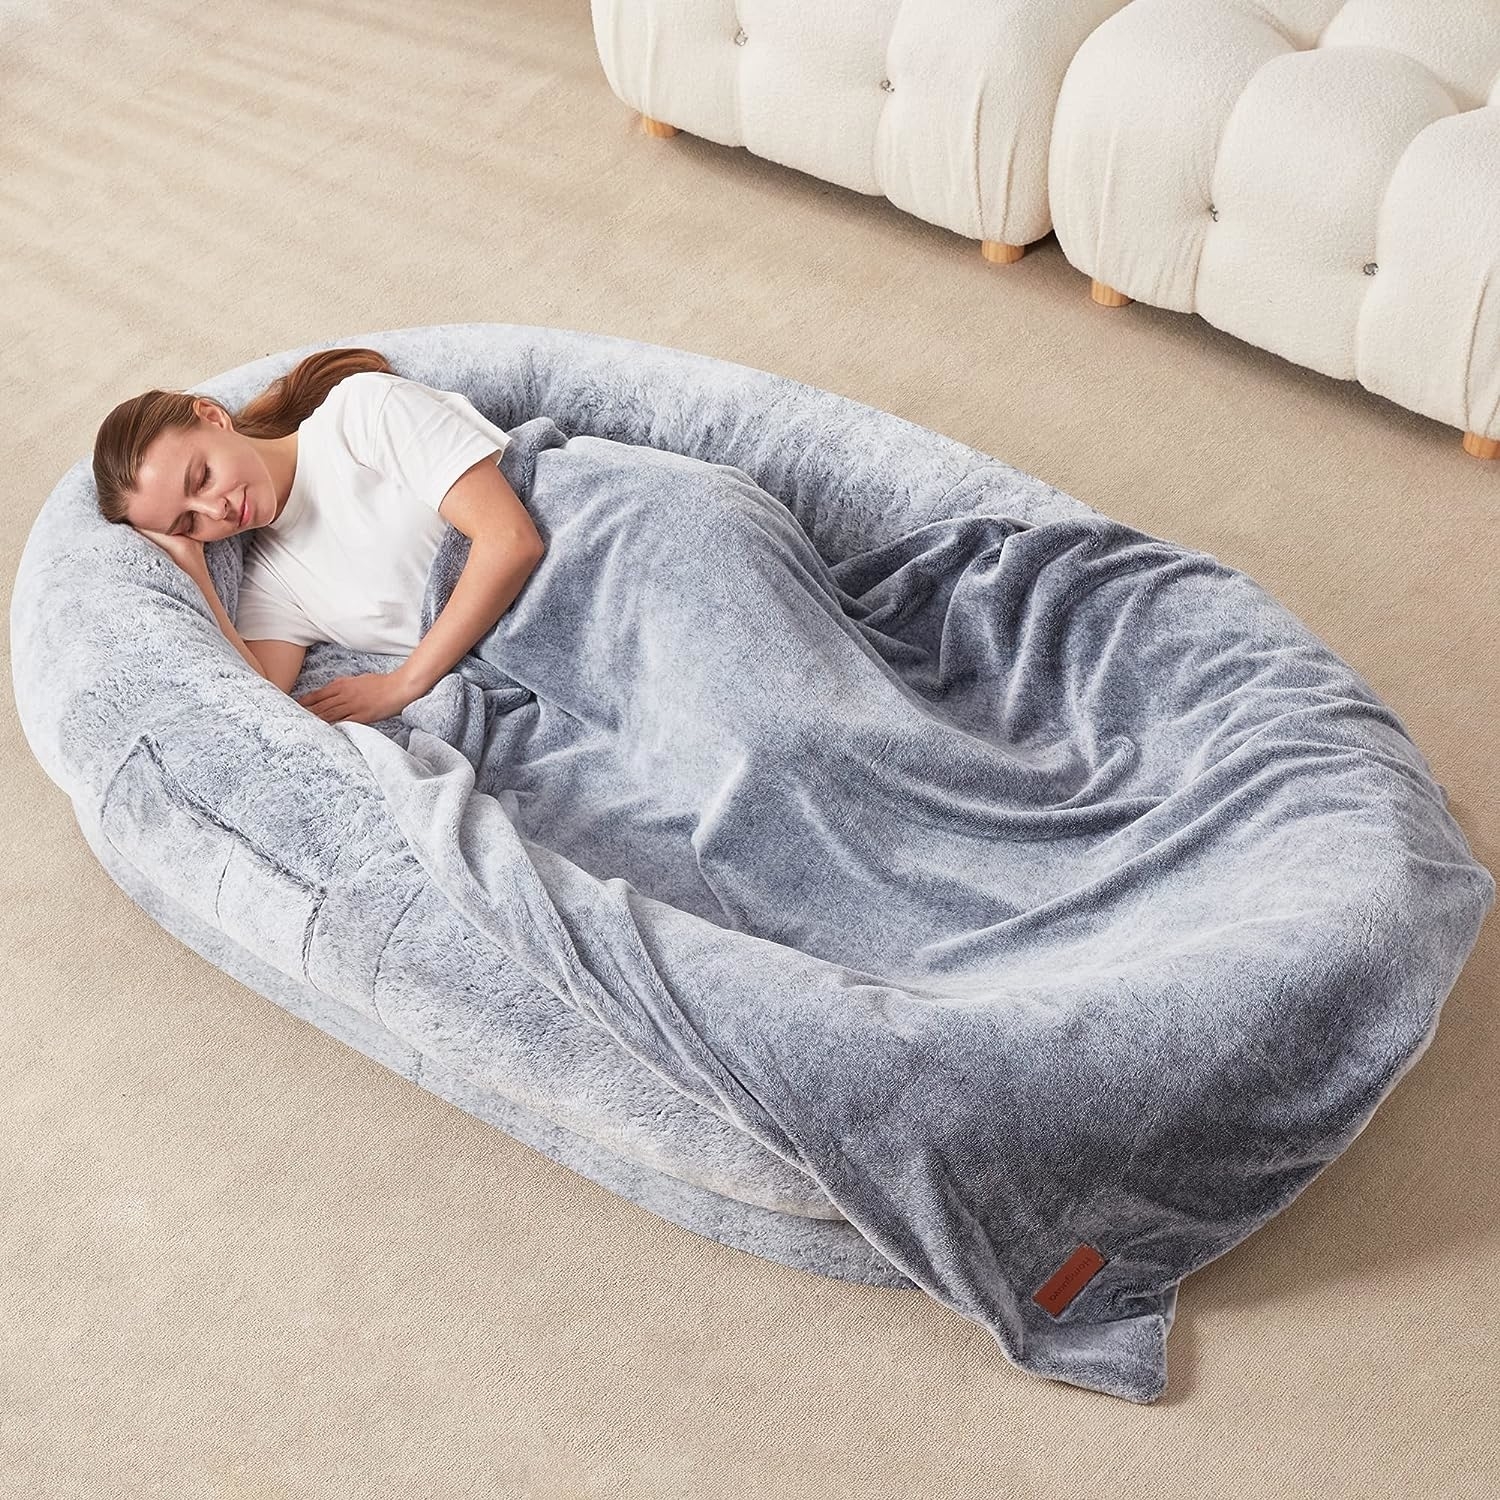 model in human-size dog bed